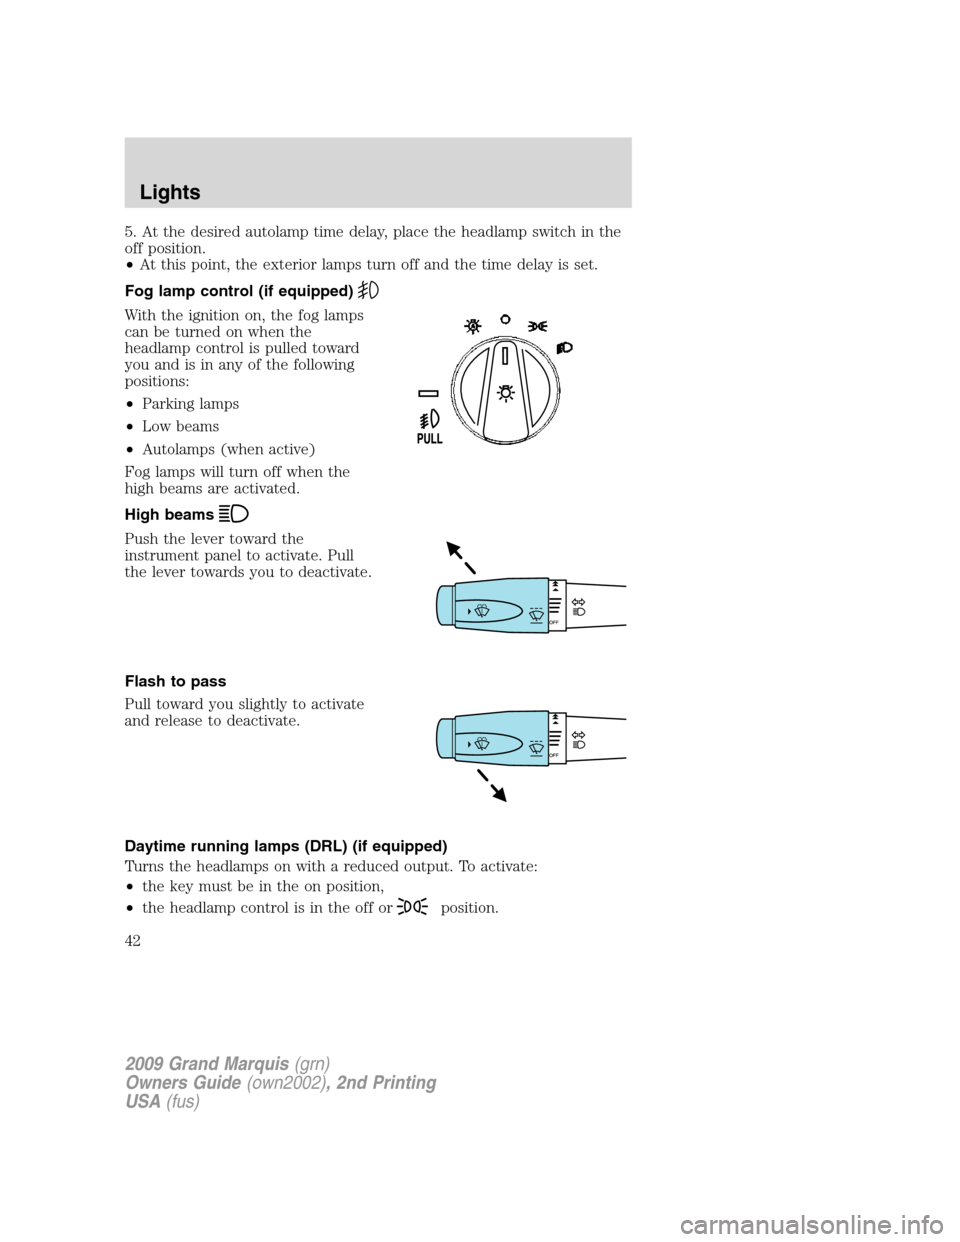 Mercury Grand Marquis 2009  s Service Manual 5. At the desired autolamp time delay, place the headlamp switch in the
off position.
•At this point, the exterior lamps turn off and the time delay is set.
Fog lamp control (if equipped)
With the i